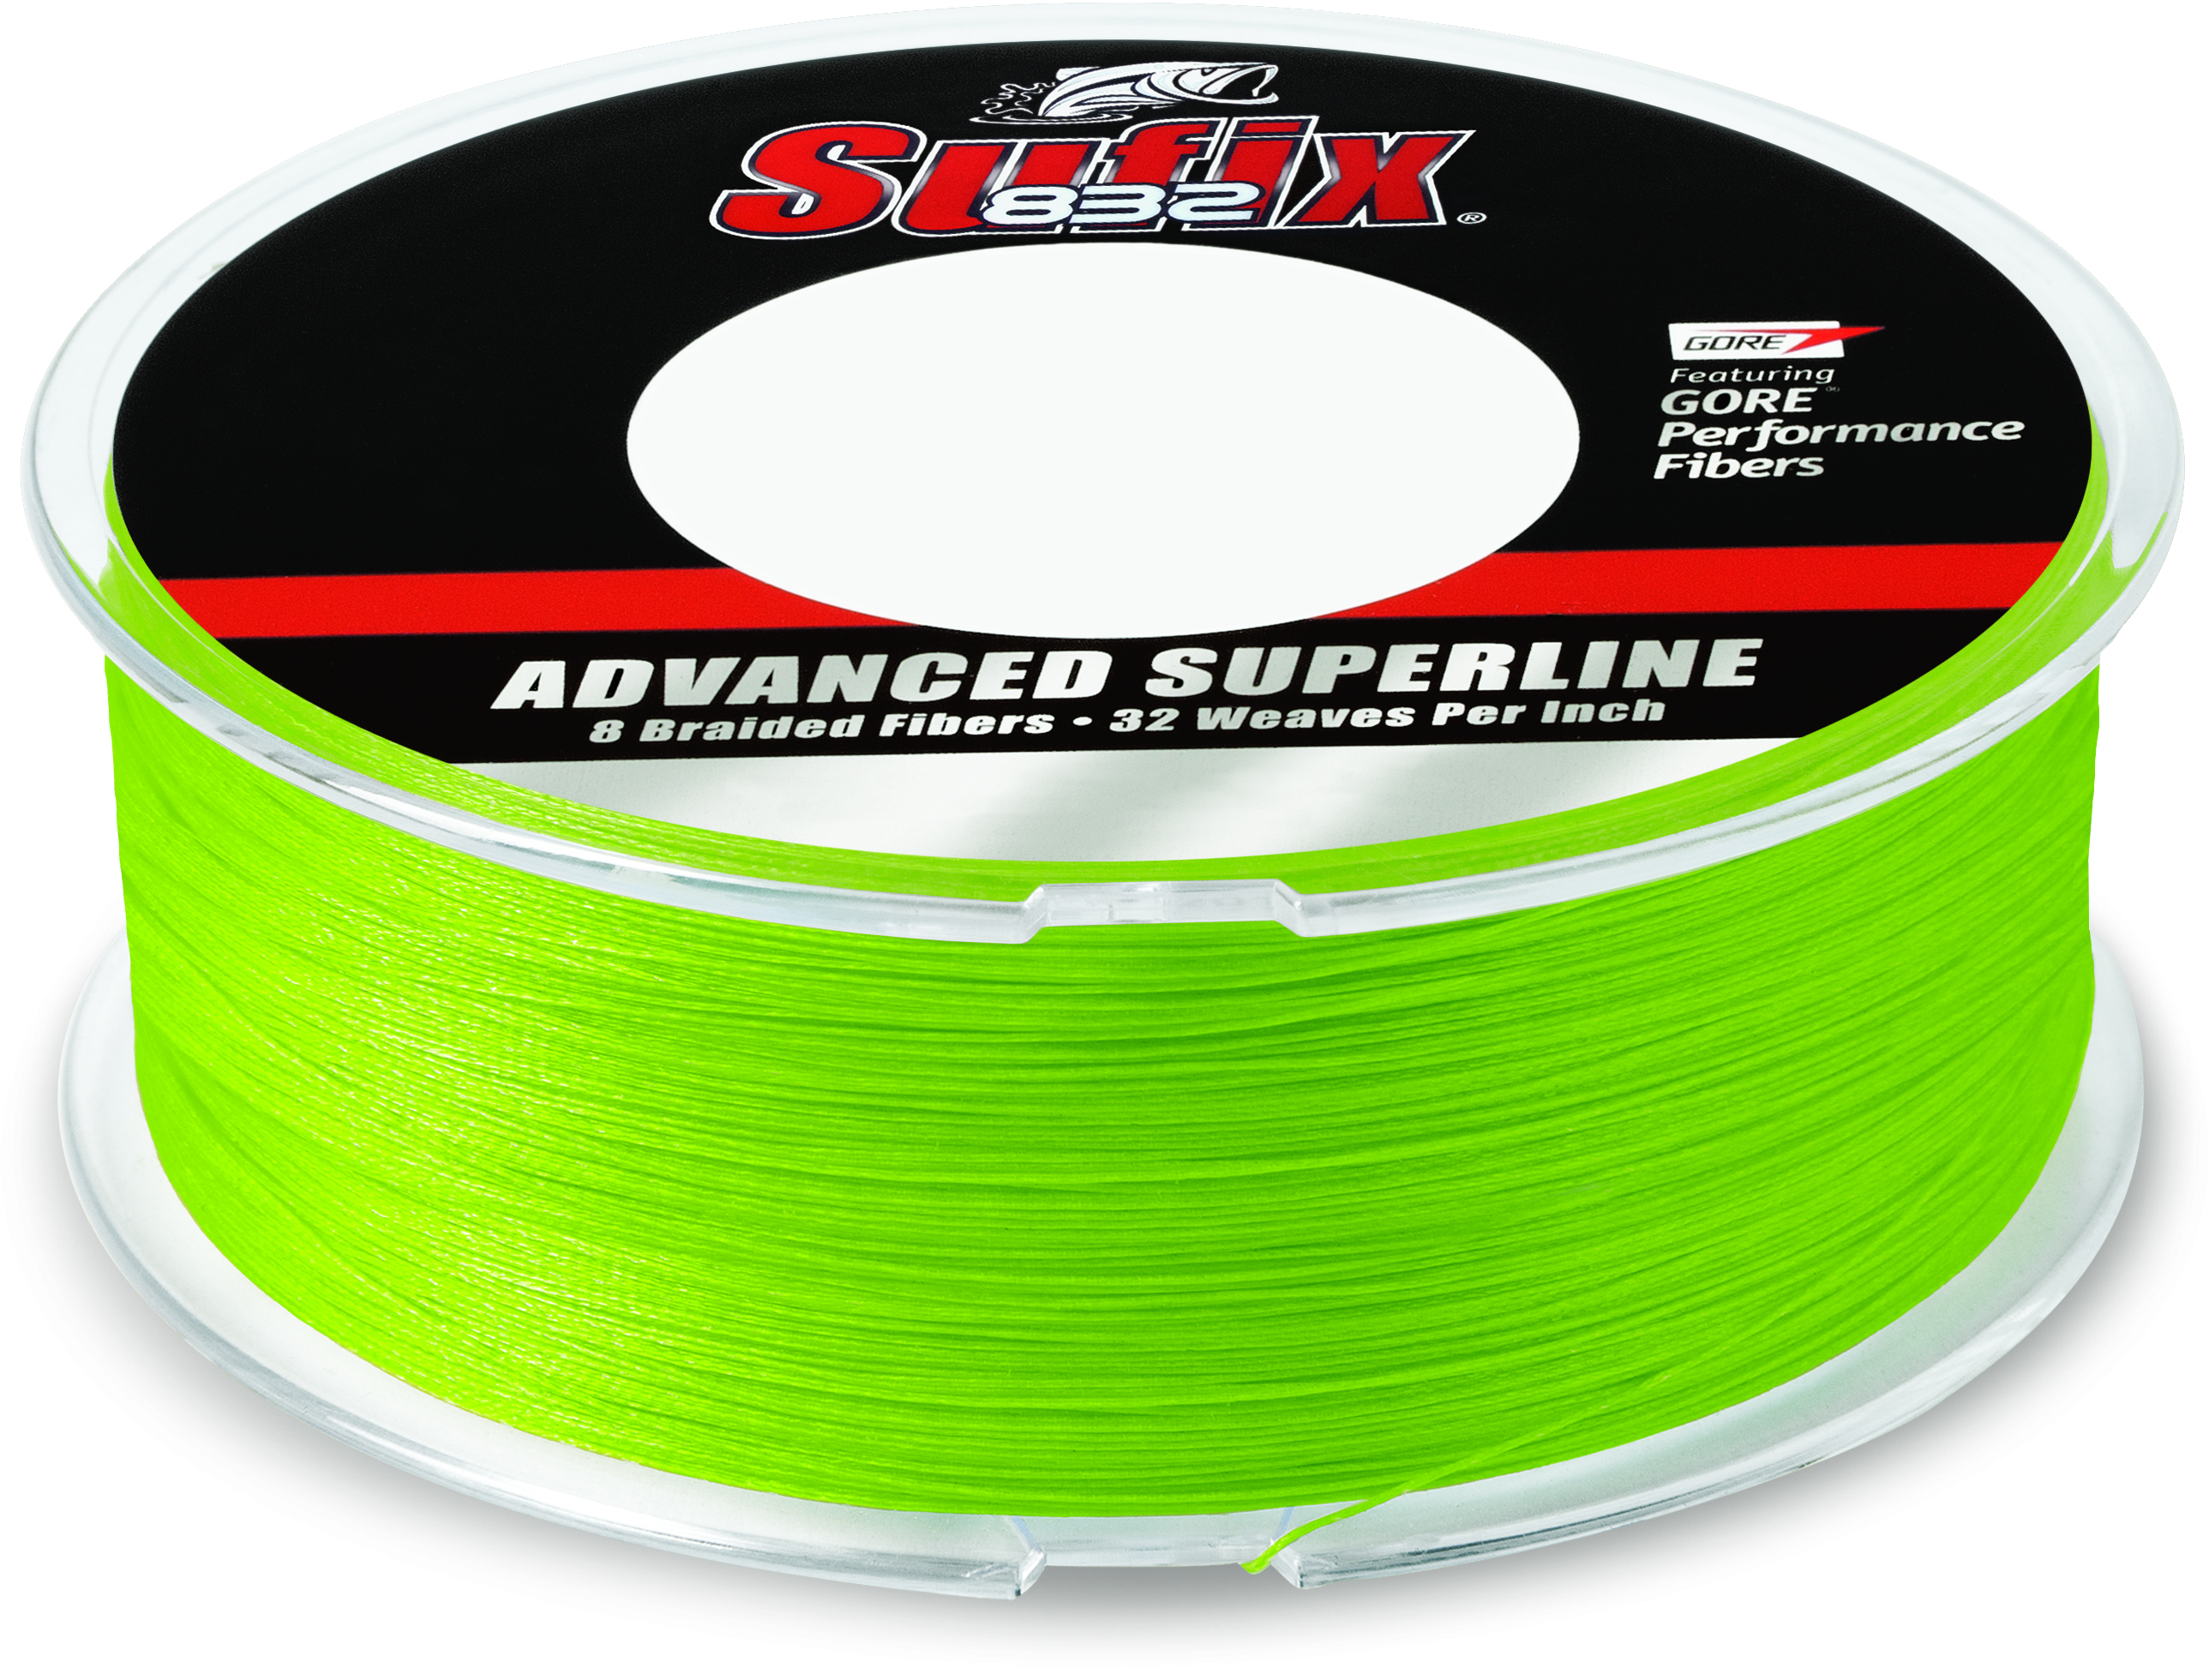 https://www.precisionfishing.com/img/products/025/025%20Sufix%20832%20Advanced%20Superline%20Braided%20600%20Yds%20-%20Neon%20Lime.jpg